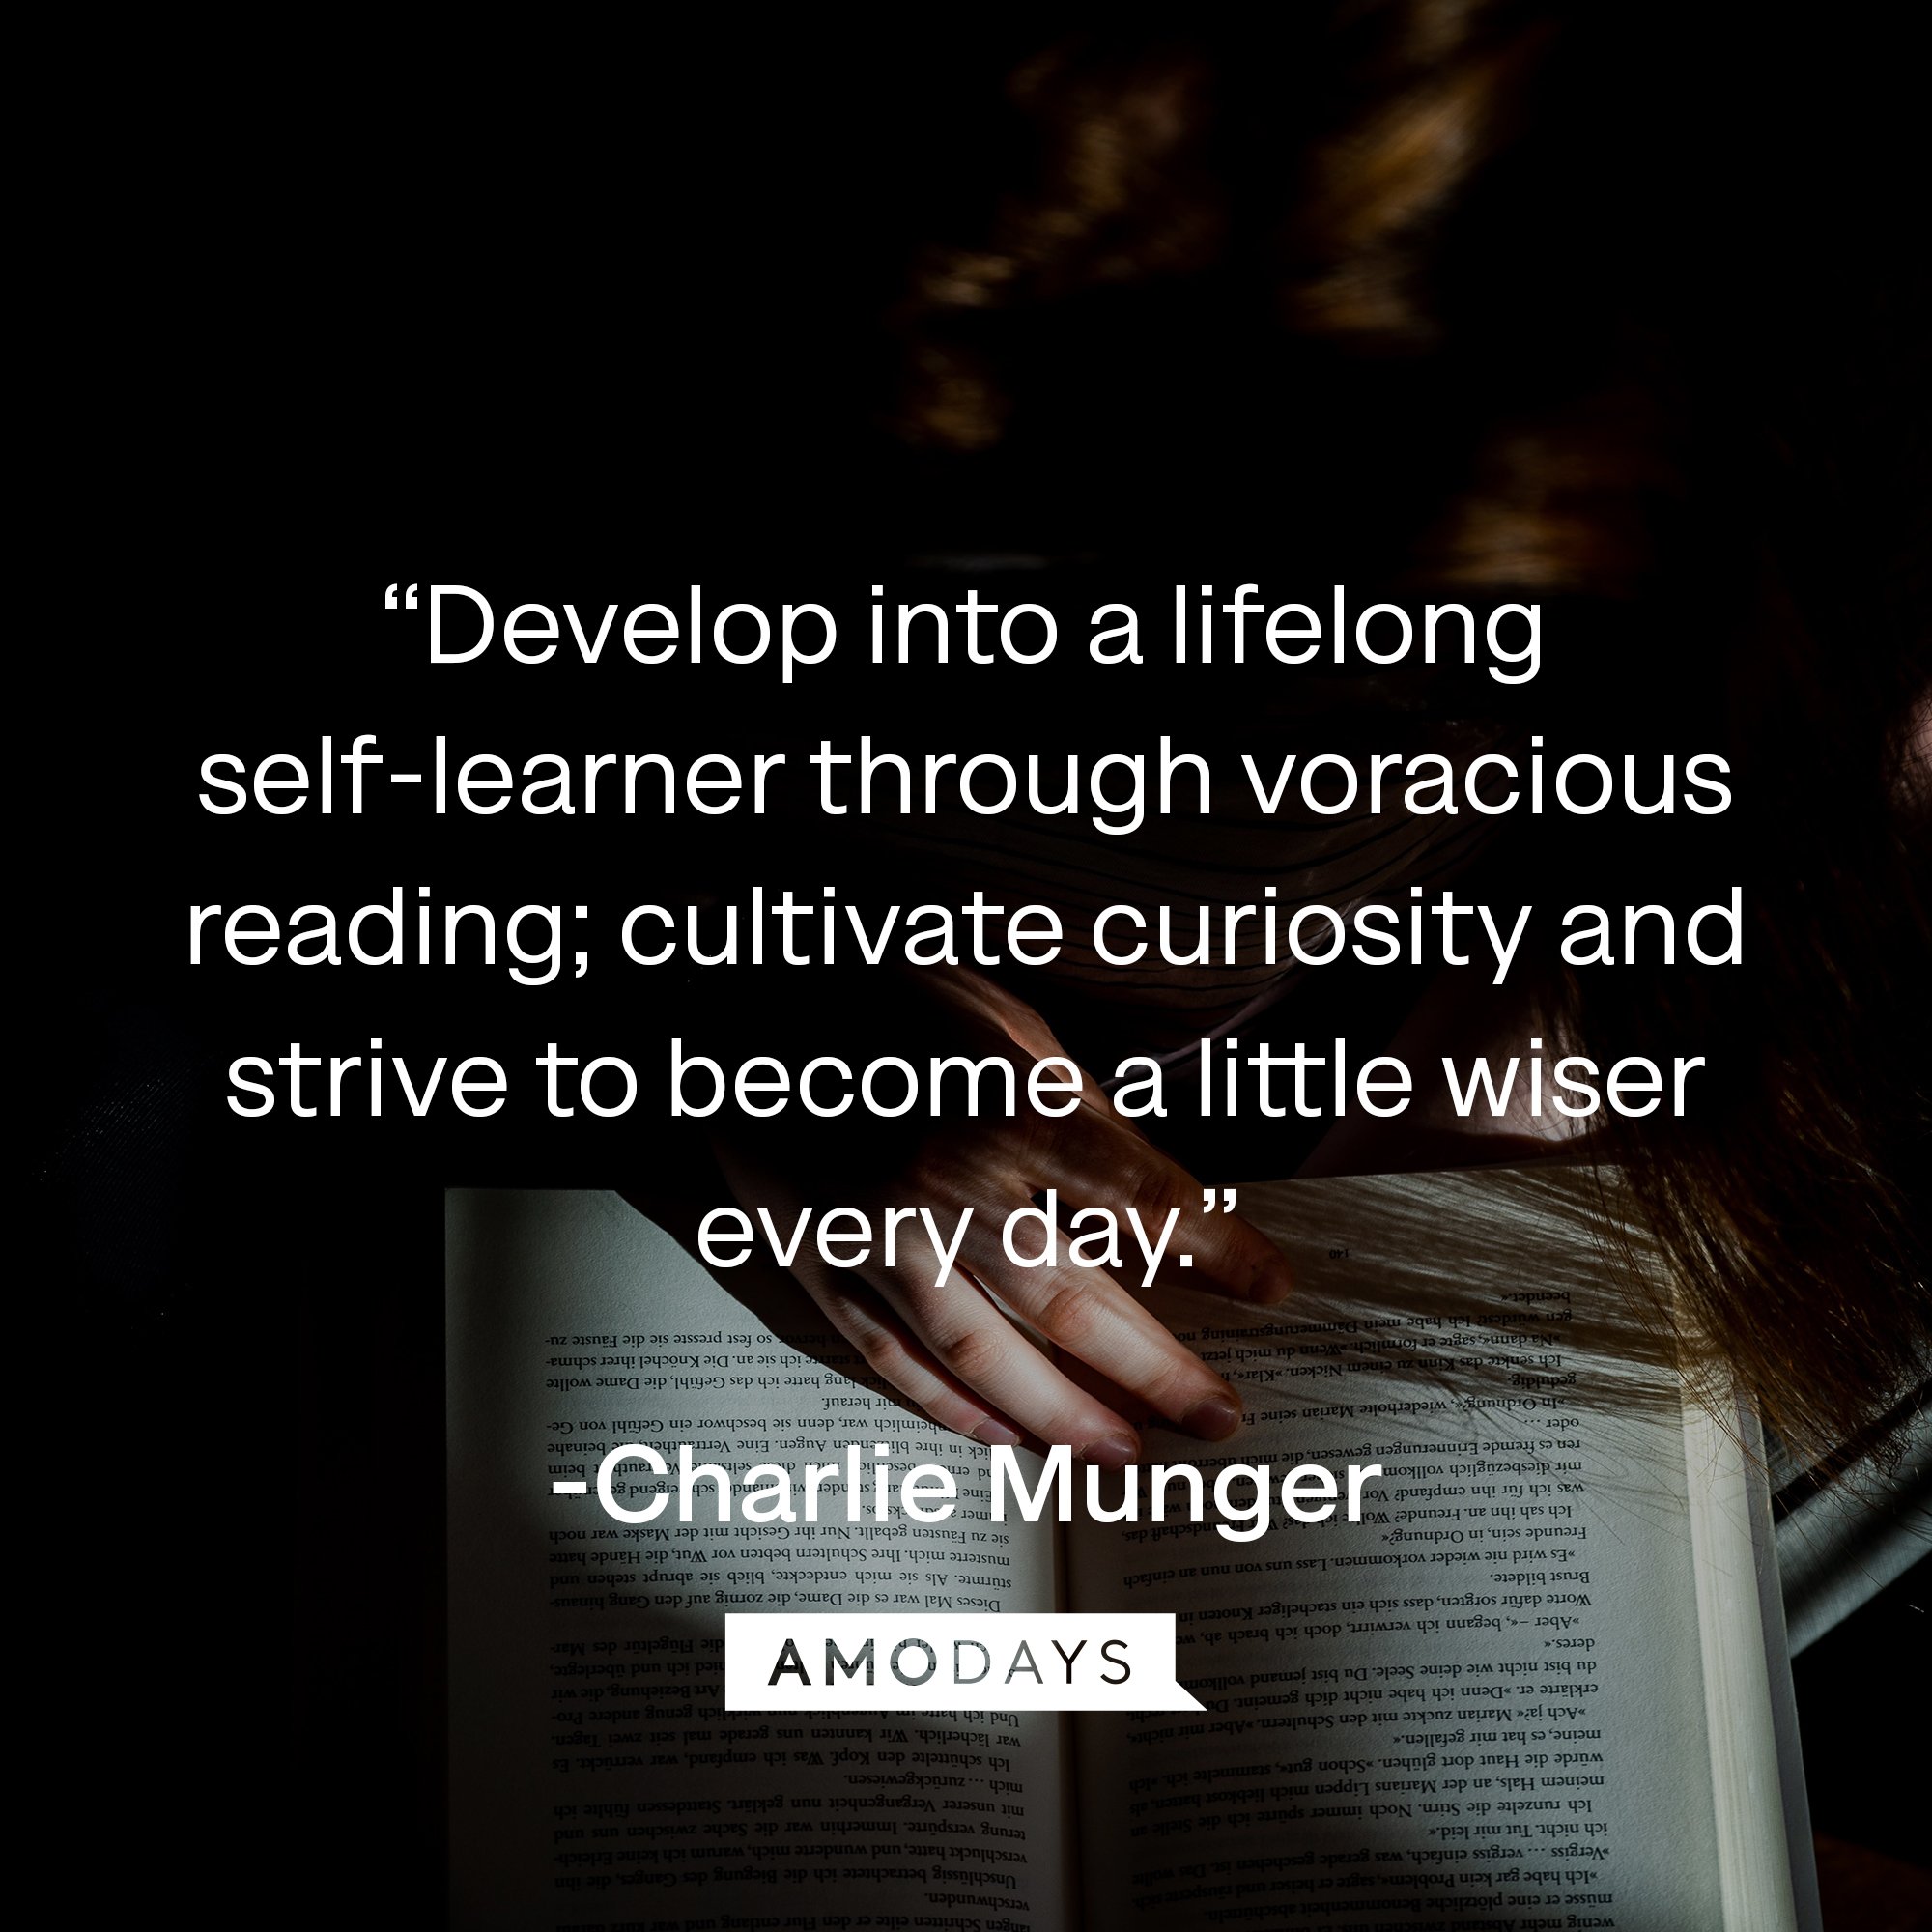  Charlie Munger's quote: “Develop into a lifelong self-learner through voracious reading; cultivate curiosity and strive to become a little wiser every day.” | Image: AmoDays